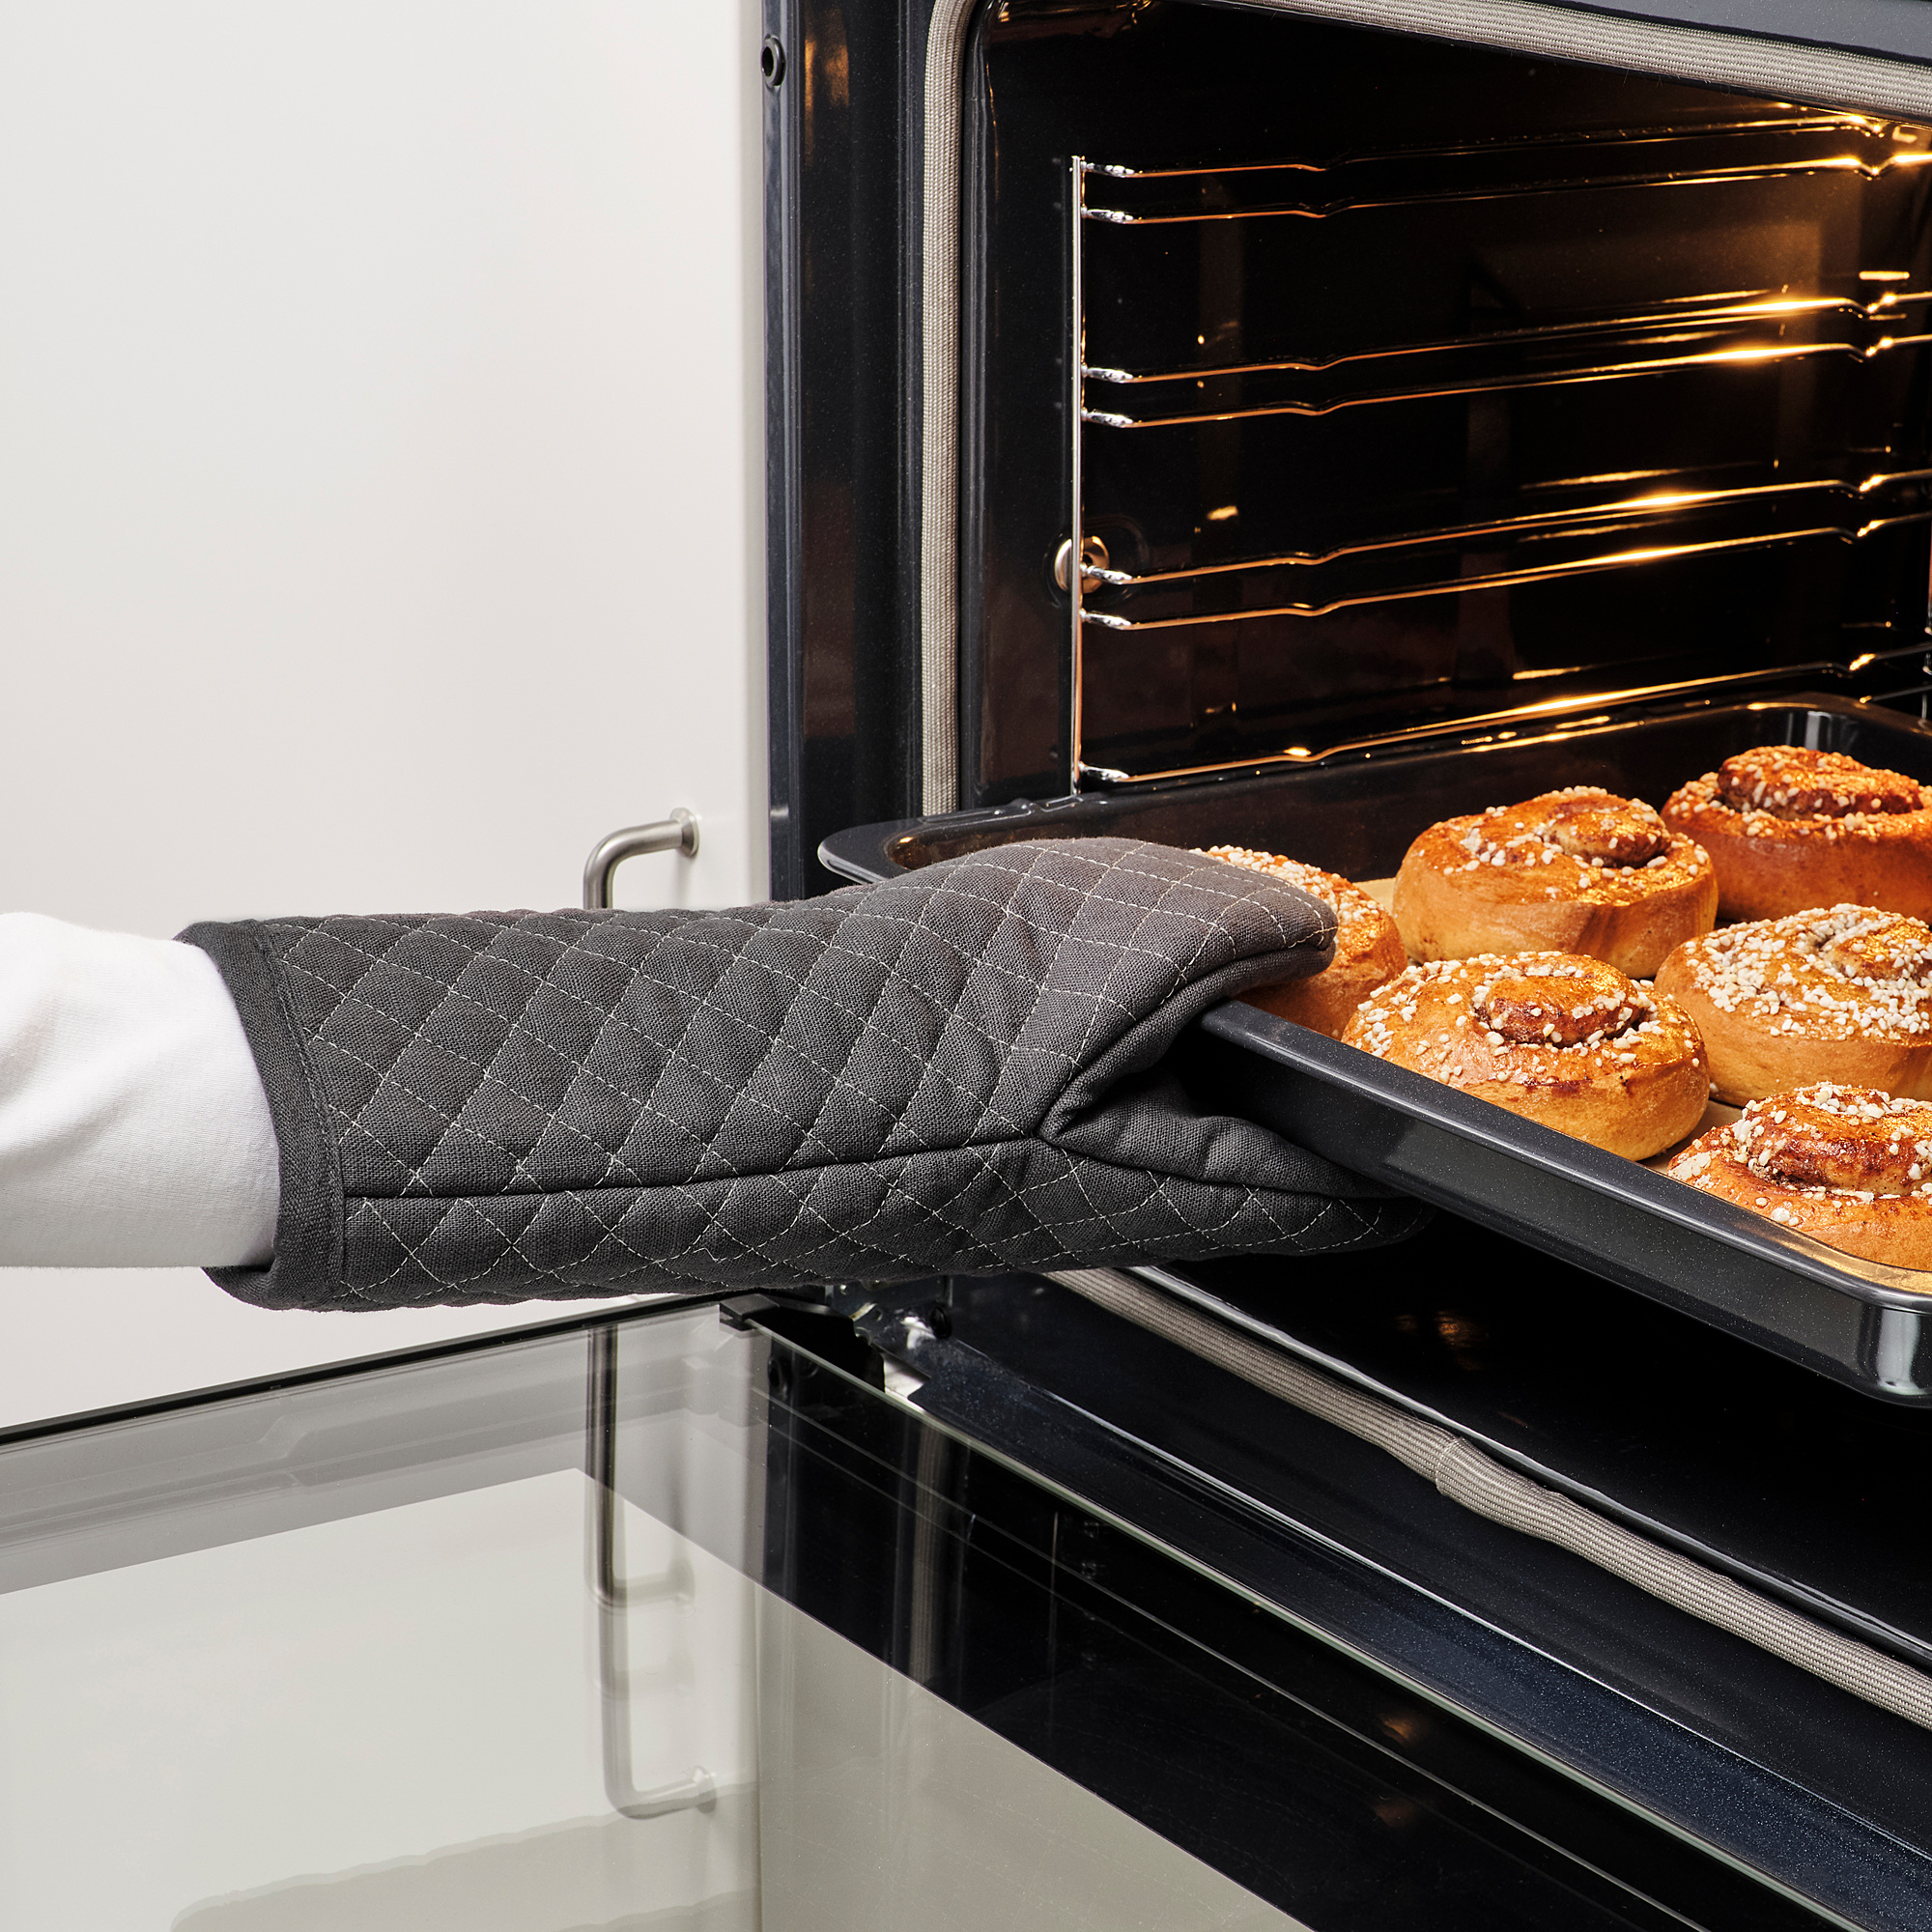 MARIATHERES oven glove